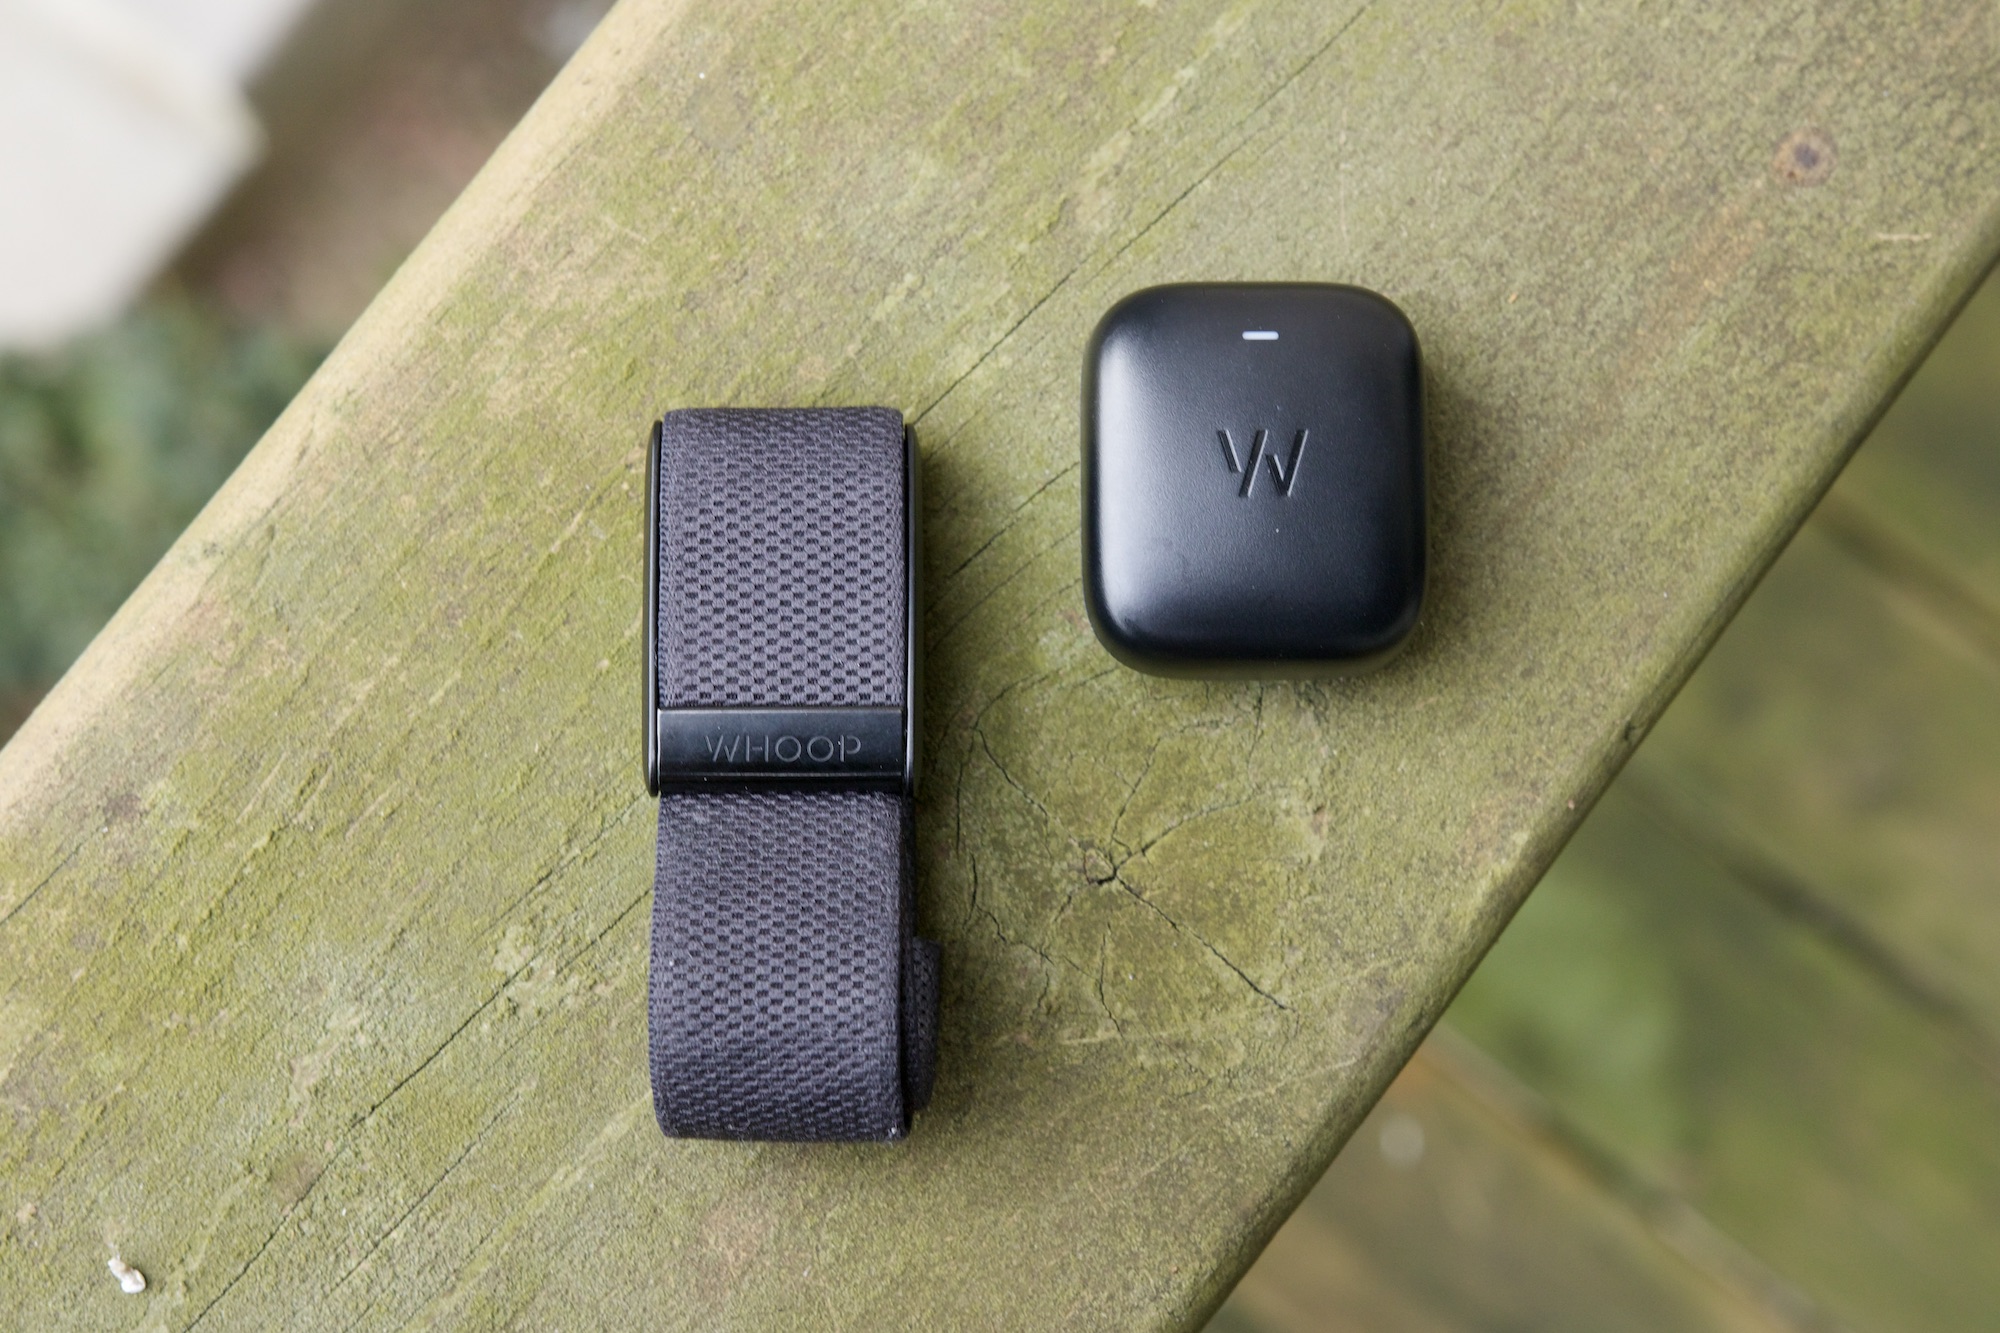 The Whoop 4.0 next to its Battery Pack accessory.